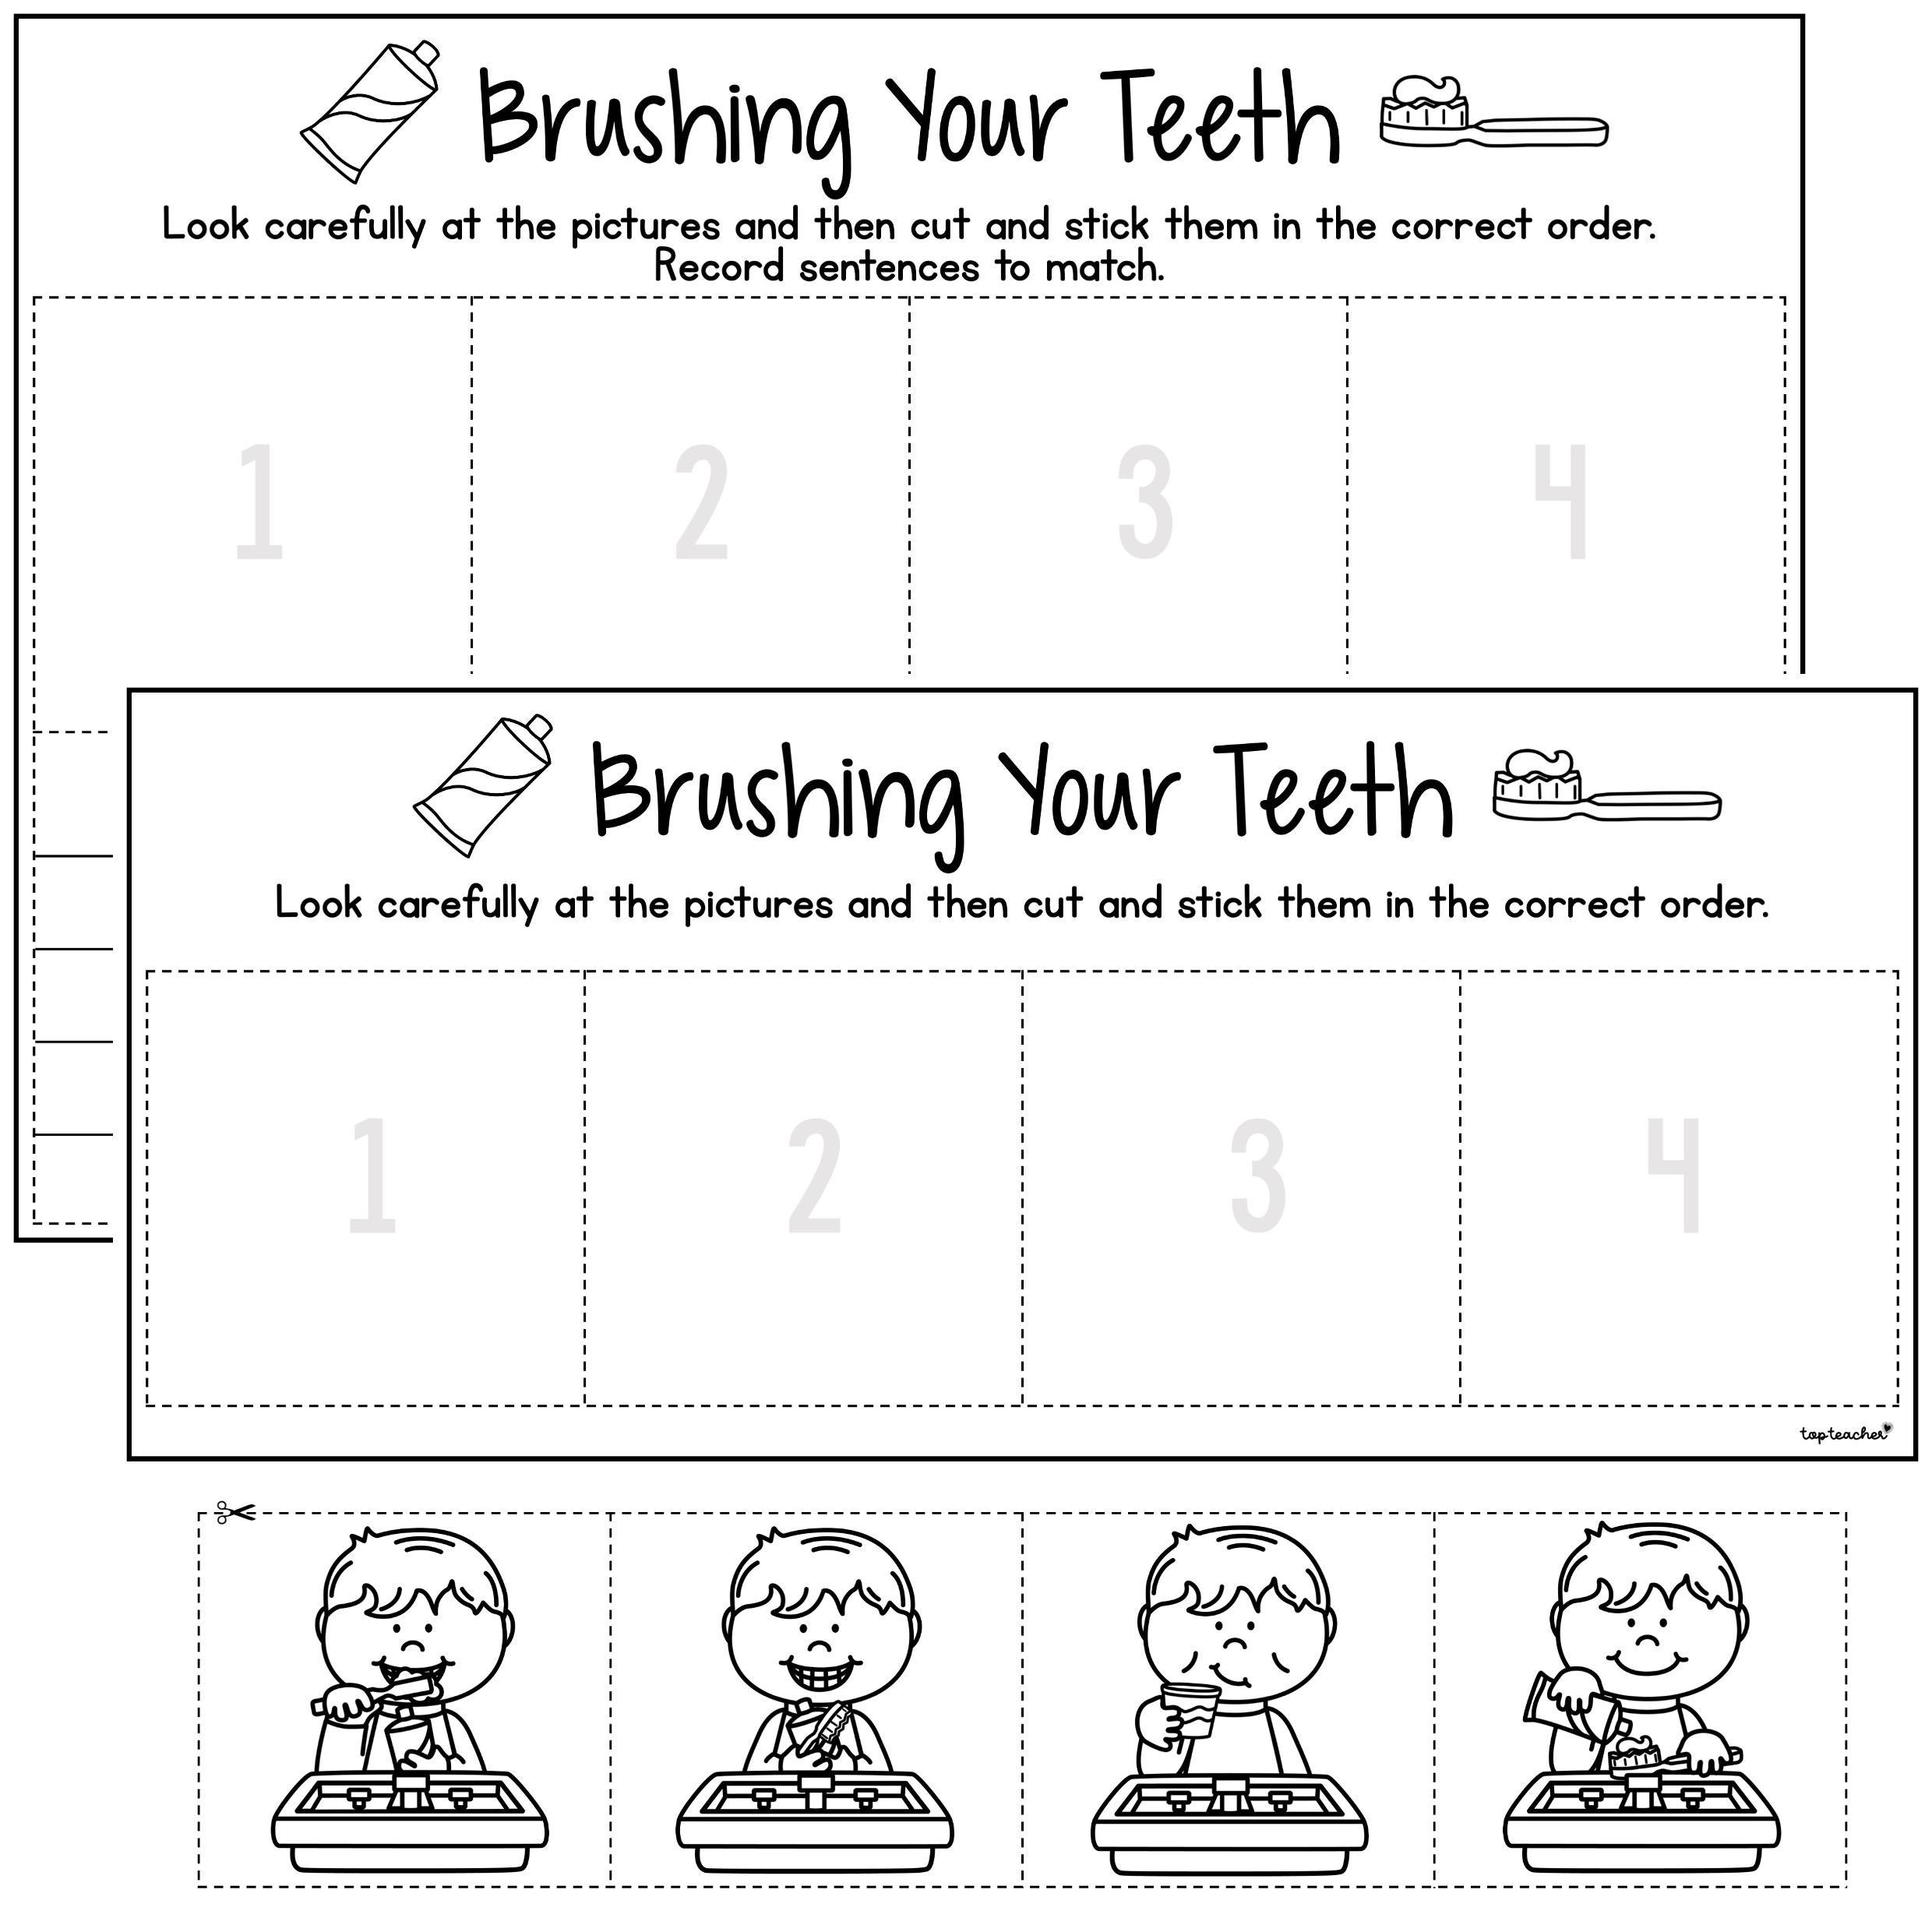 sequencing-worksheets-brushing-your-teeth-top-teacher